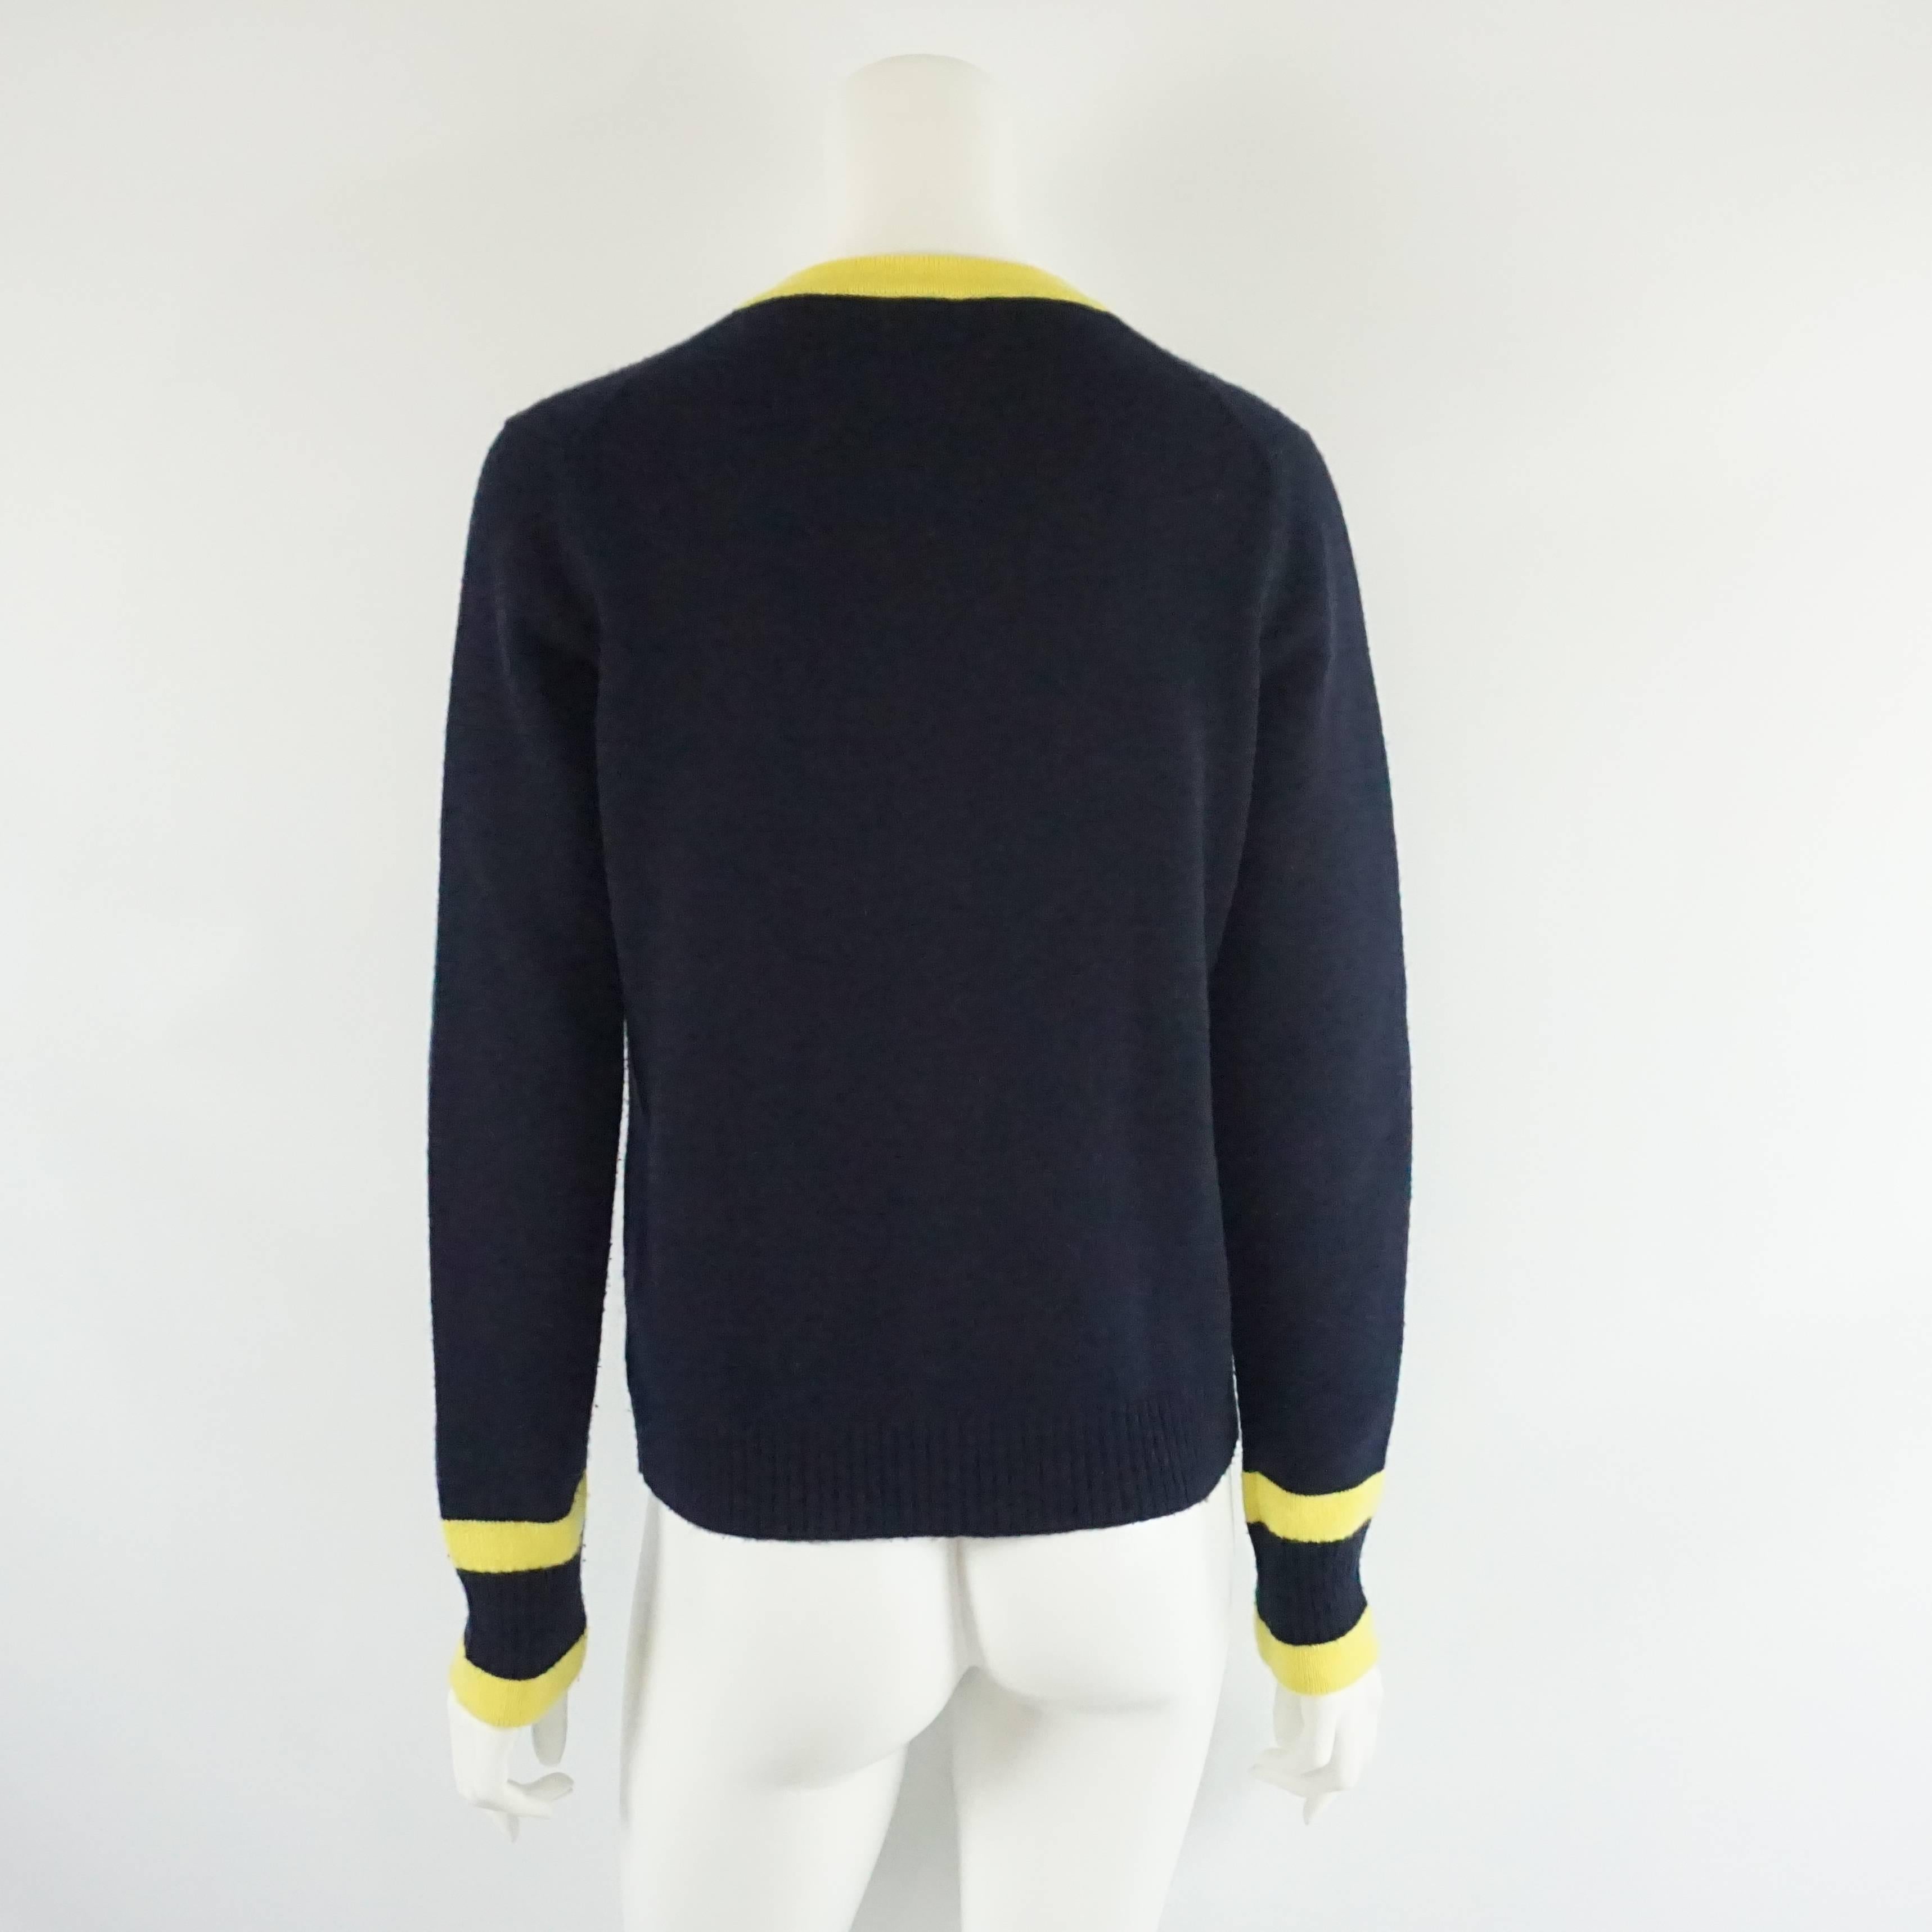 navy and yellow cardigan